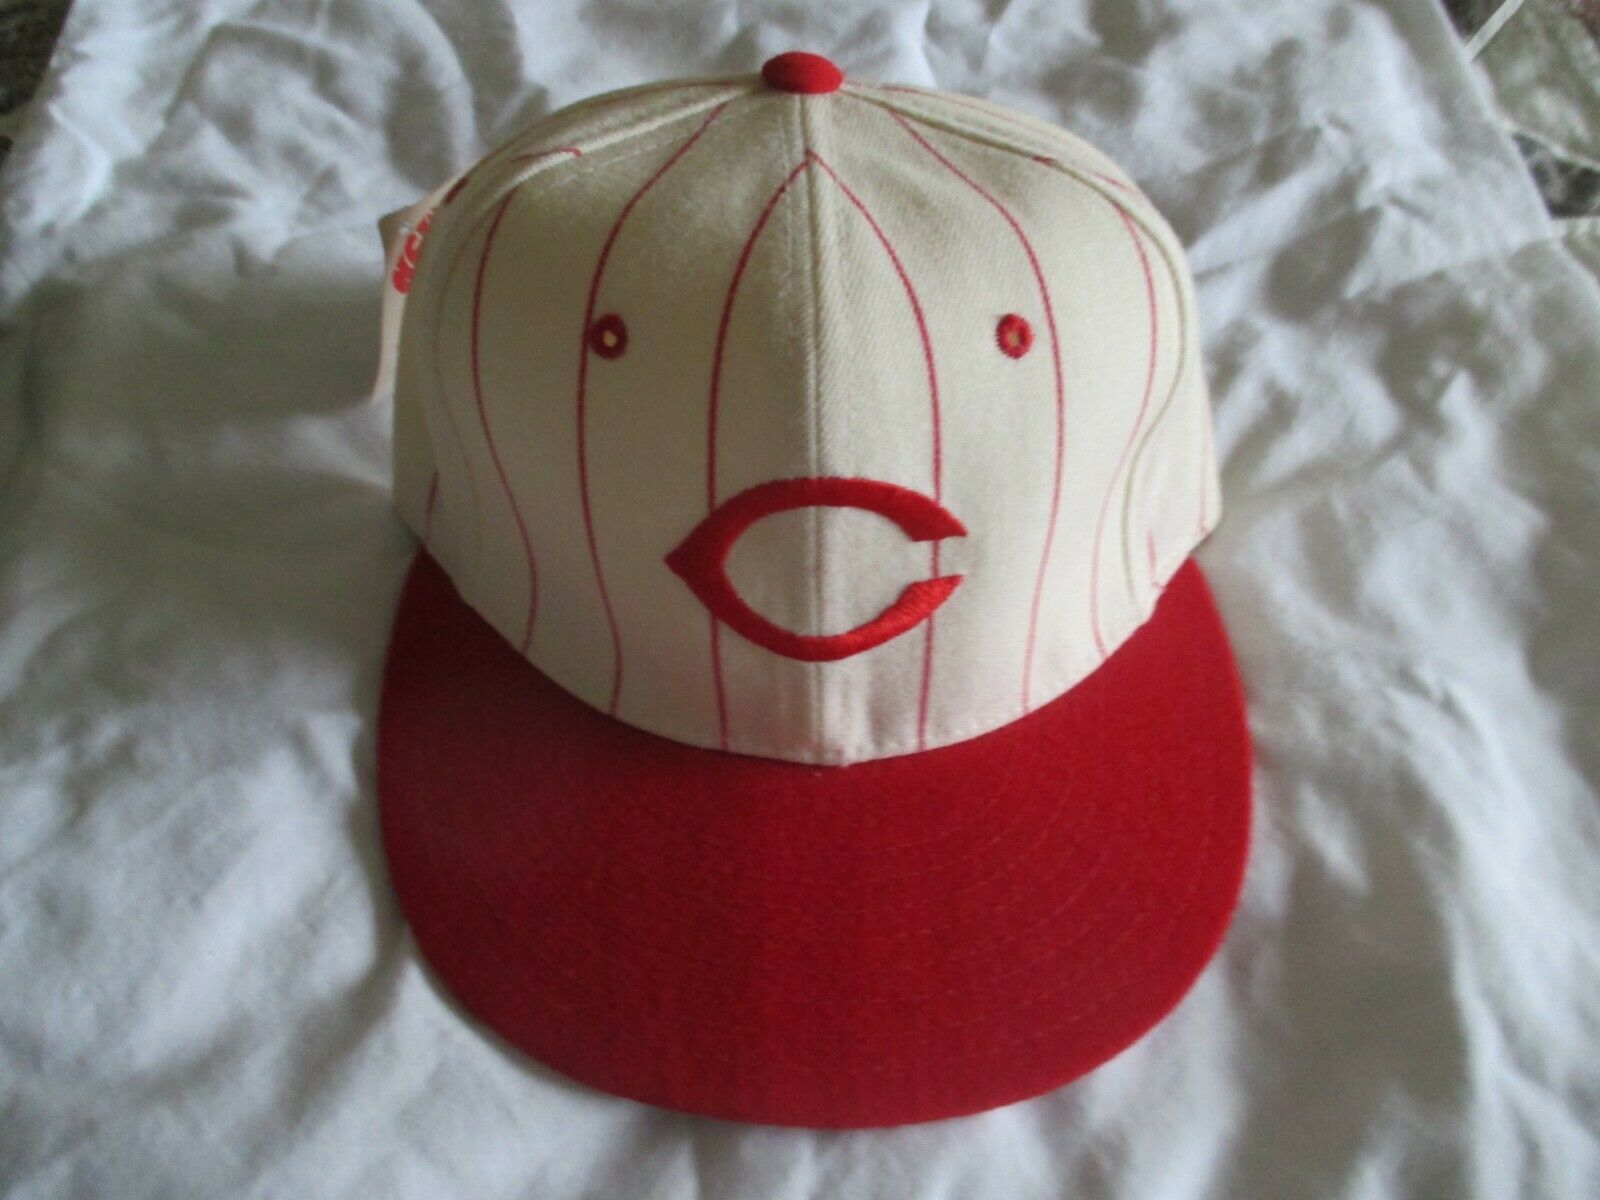 NEW ERA CINCINATI REDS   WOOL CAP SIZE 6 3/4 (WHITE WITH RED PINSTRIPES)